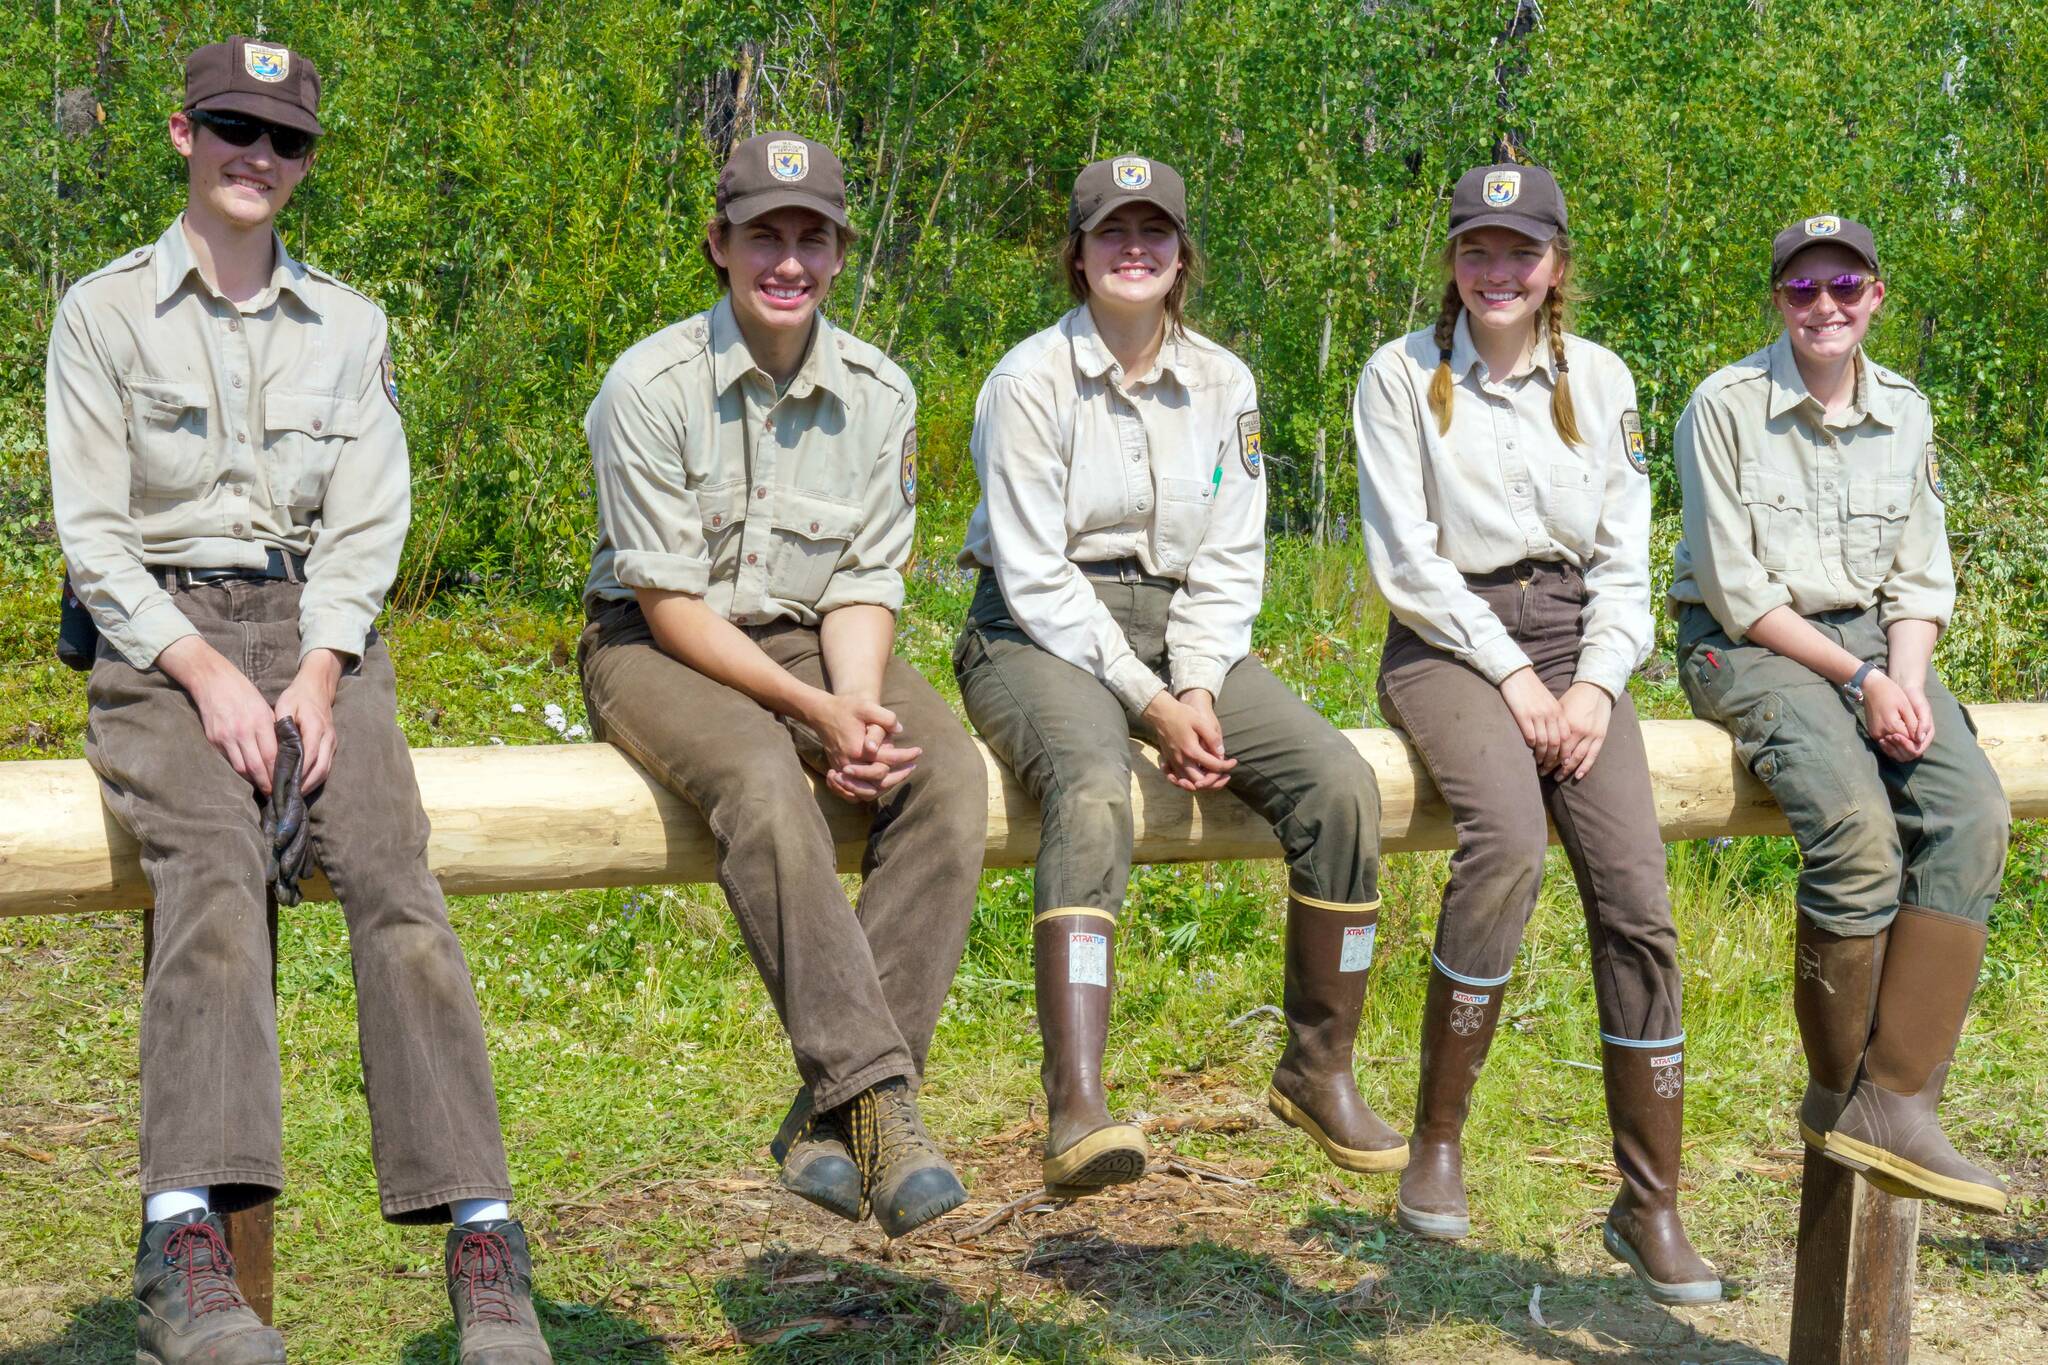 The 2021 YCC Crew sits on a newly constructed hitching post at Nurses Cabin in July 2021. Left to right are Ryan Crapps, Jacob Begich, Leah Fallon, Melita Efta and Olivia Somers. (Photo by USFWS/Heather Sokul)